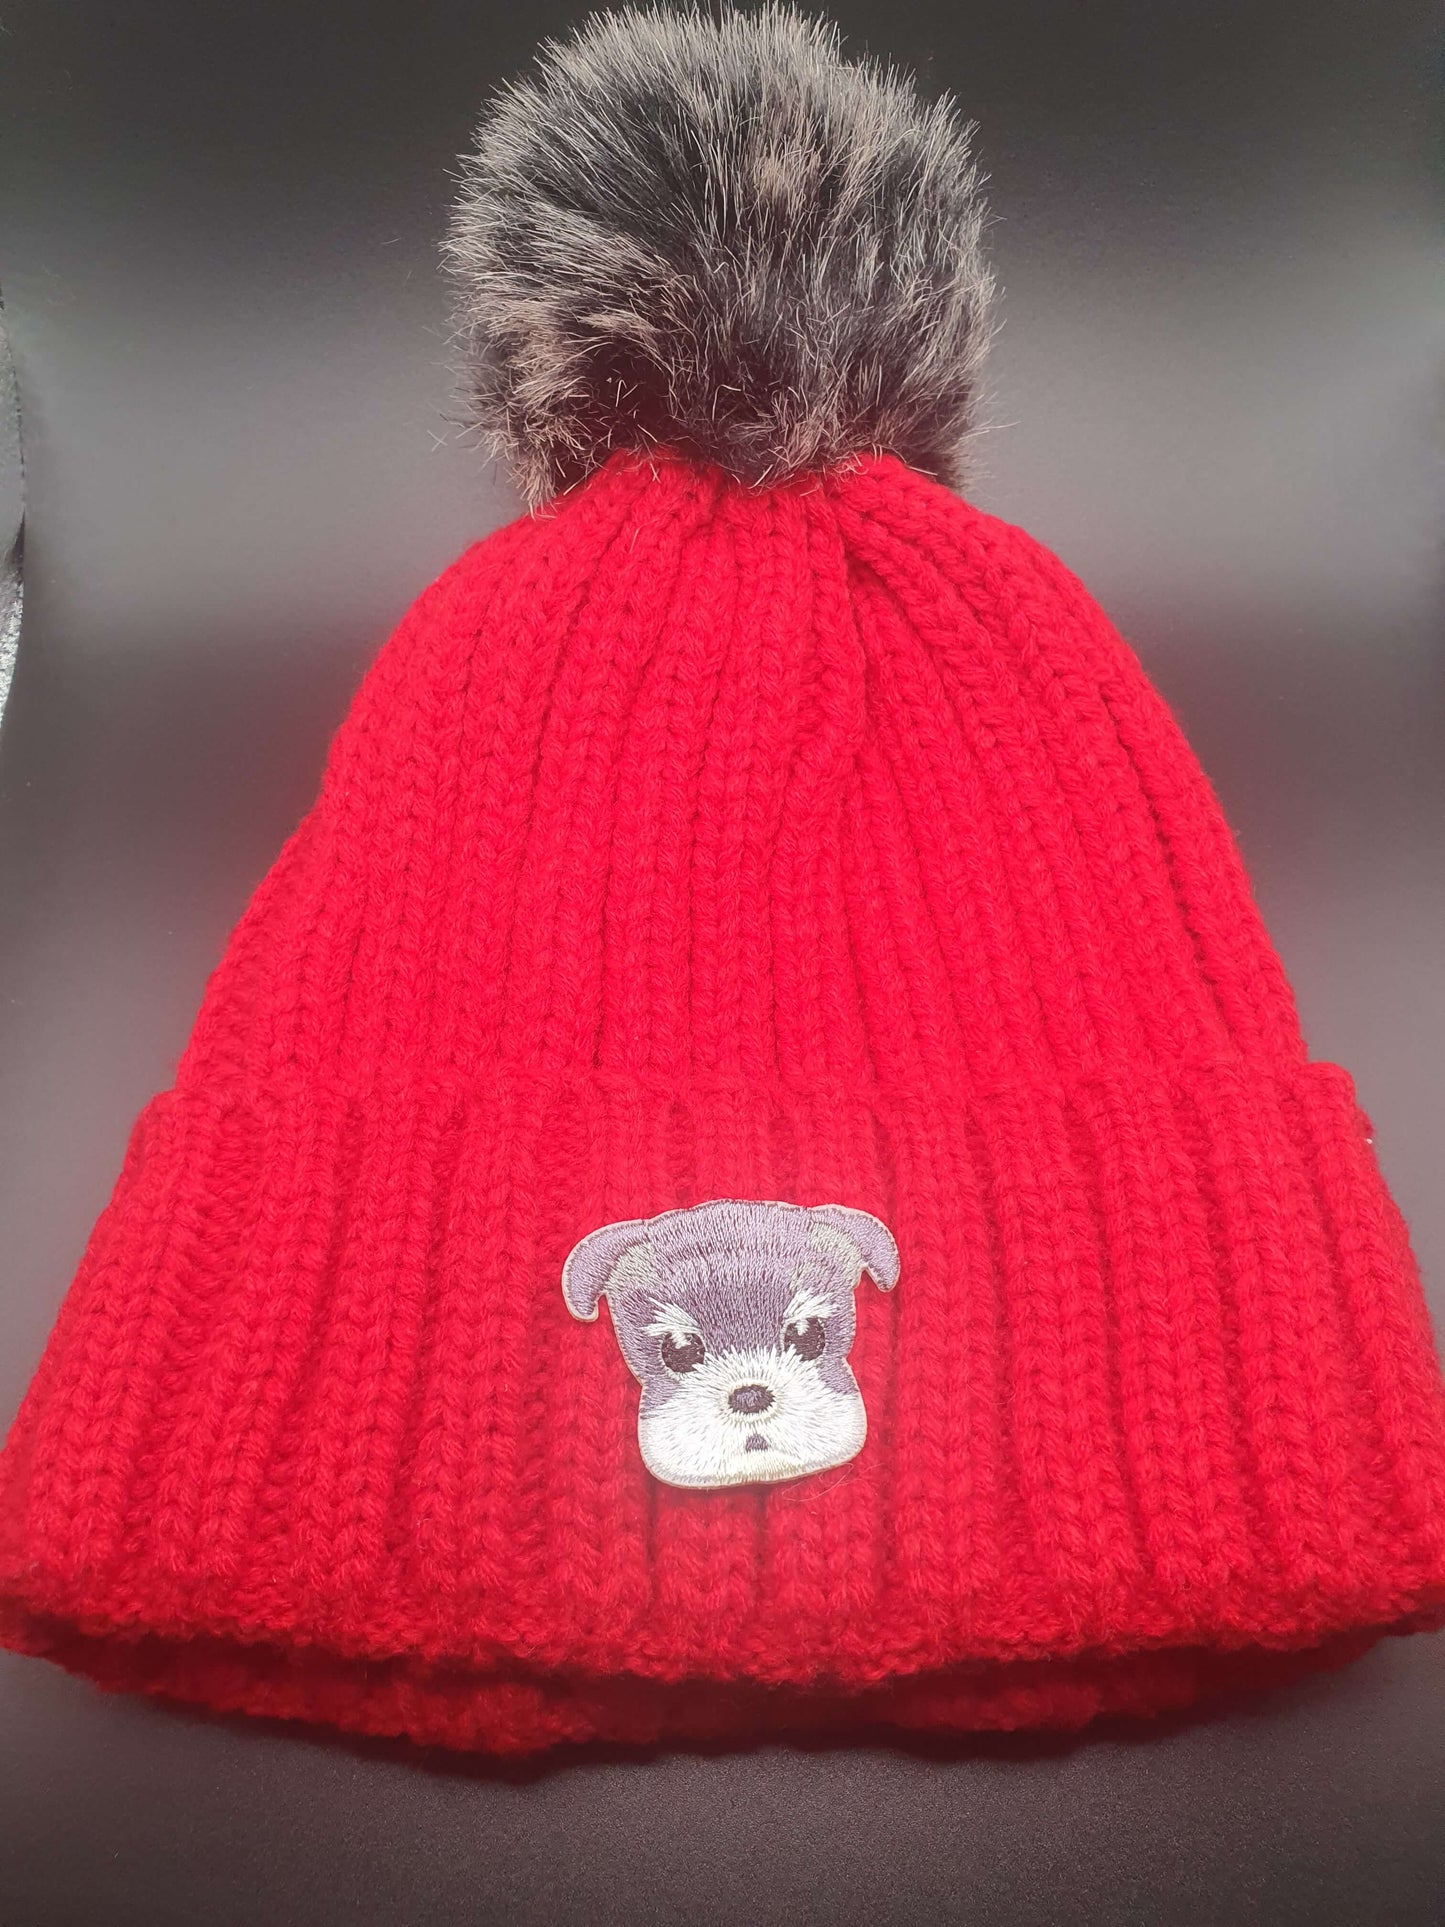 Dog Themed Knitted Beanies - Style's Bug Schnauzer / Red